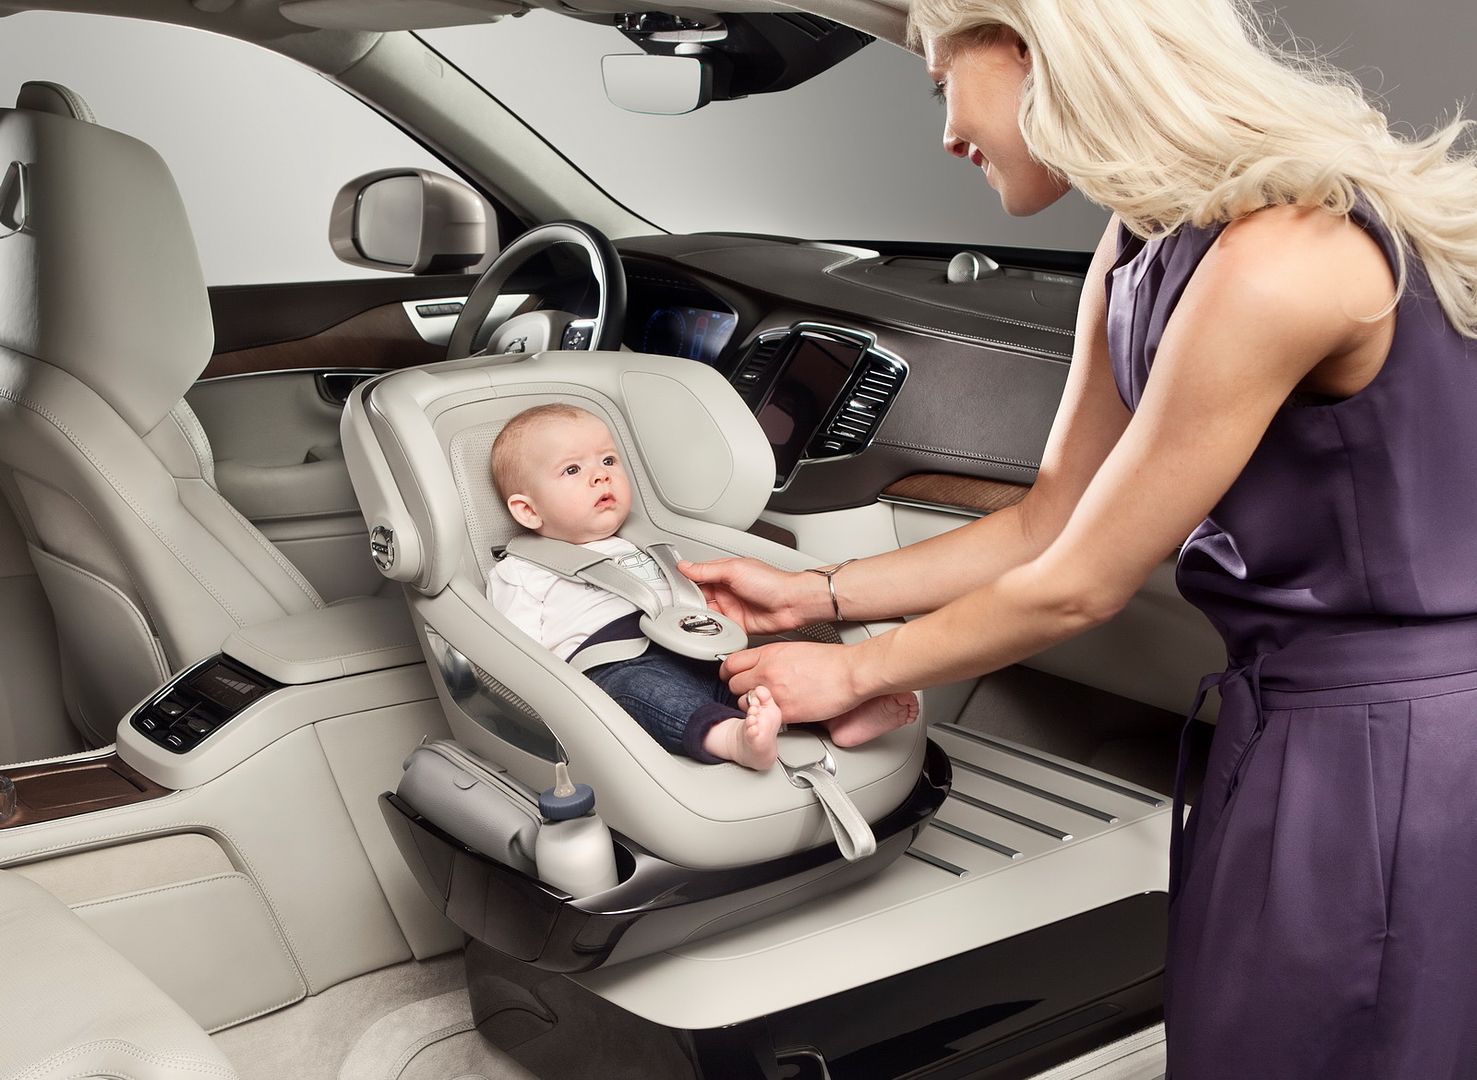 Volvo's child seat concept: The built-in seat lets the baby sit rear facing in the front, for eye contact with the other passengers